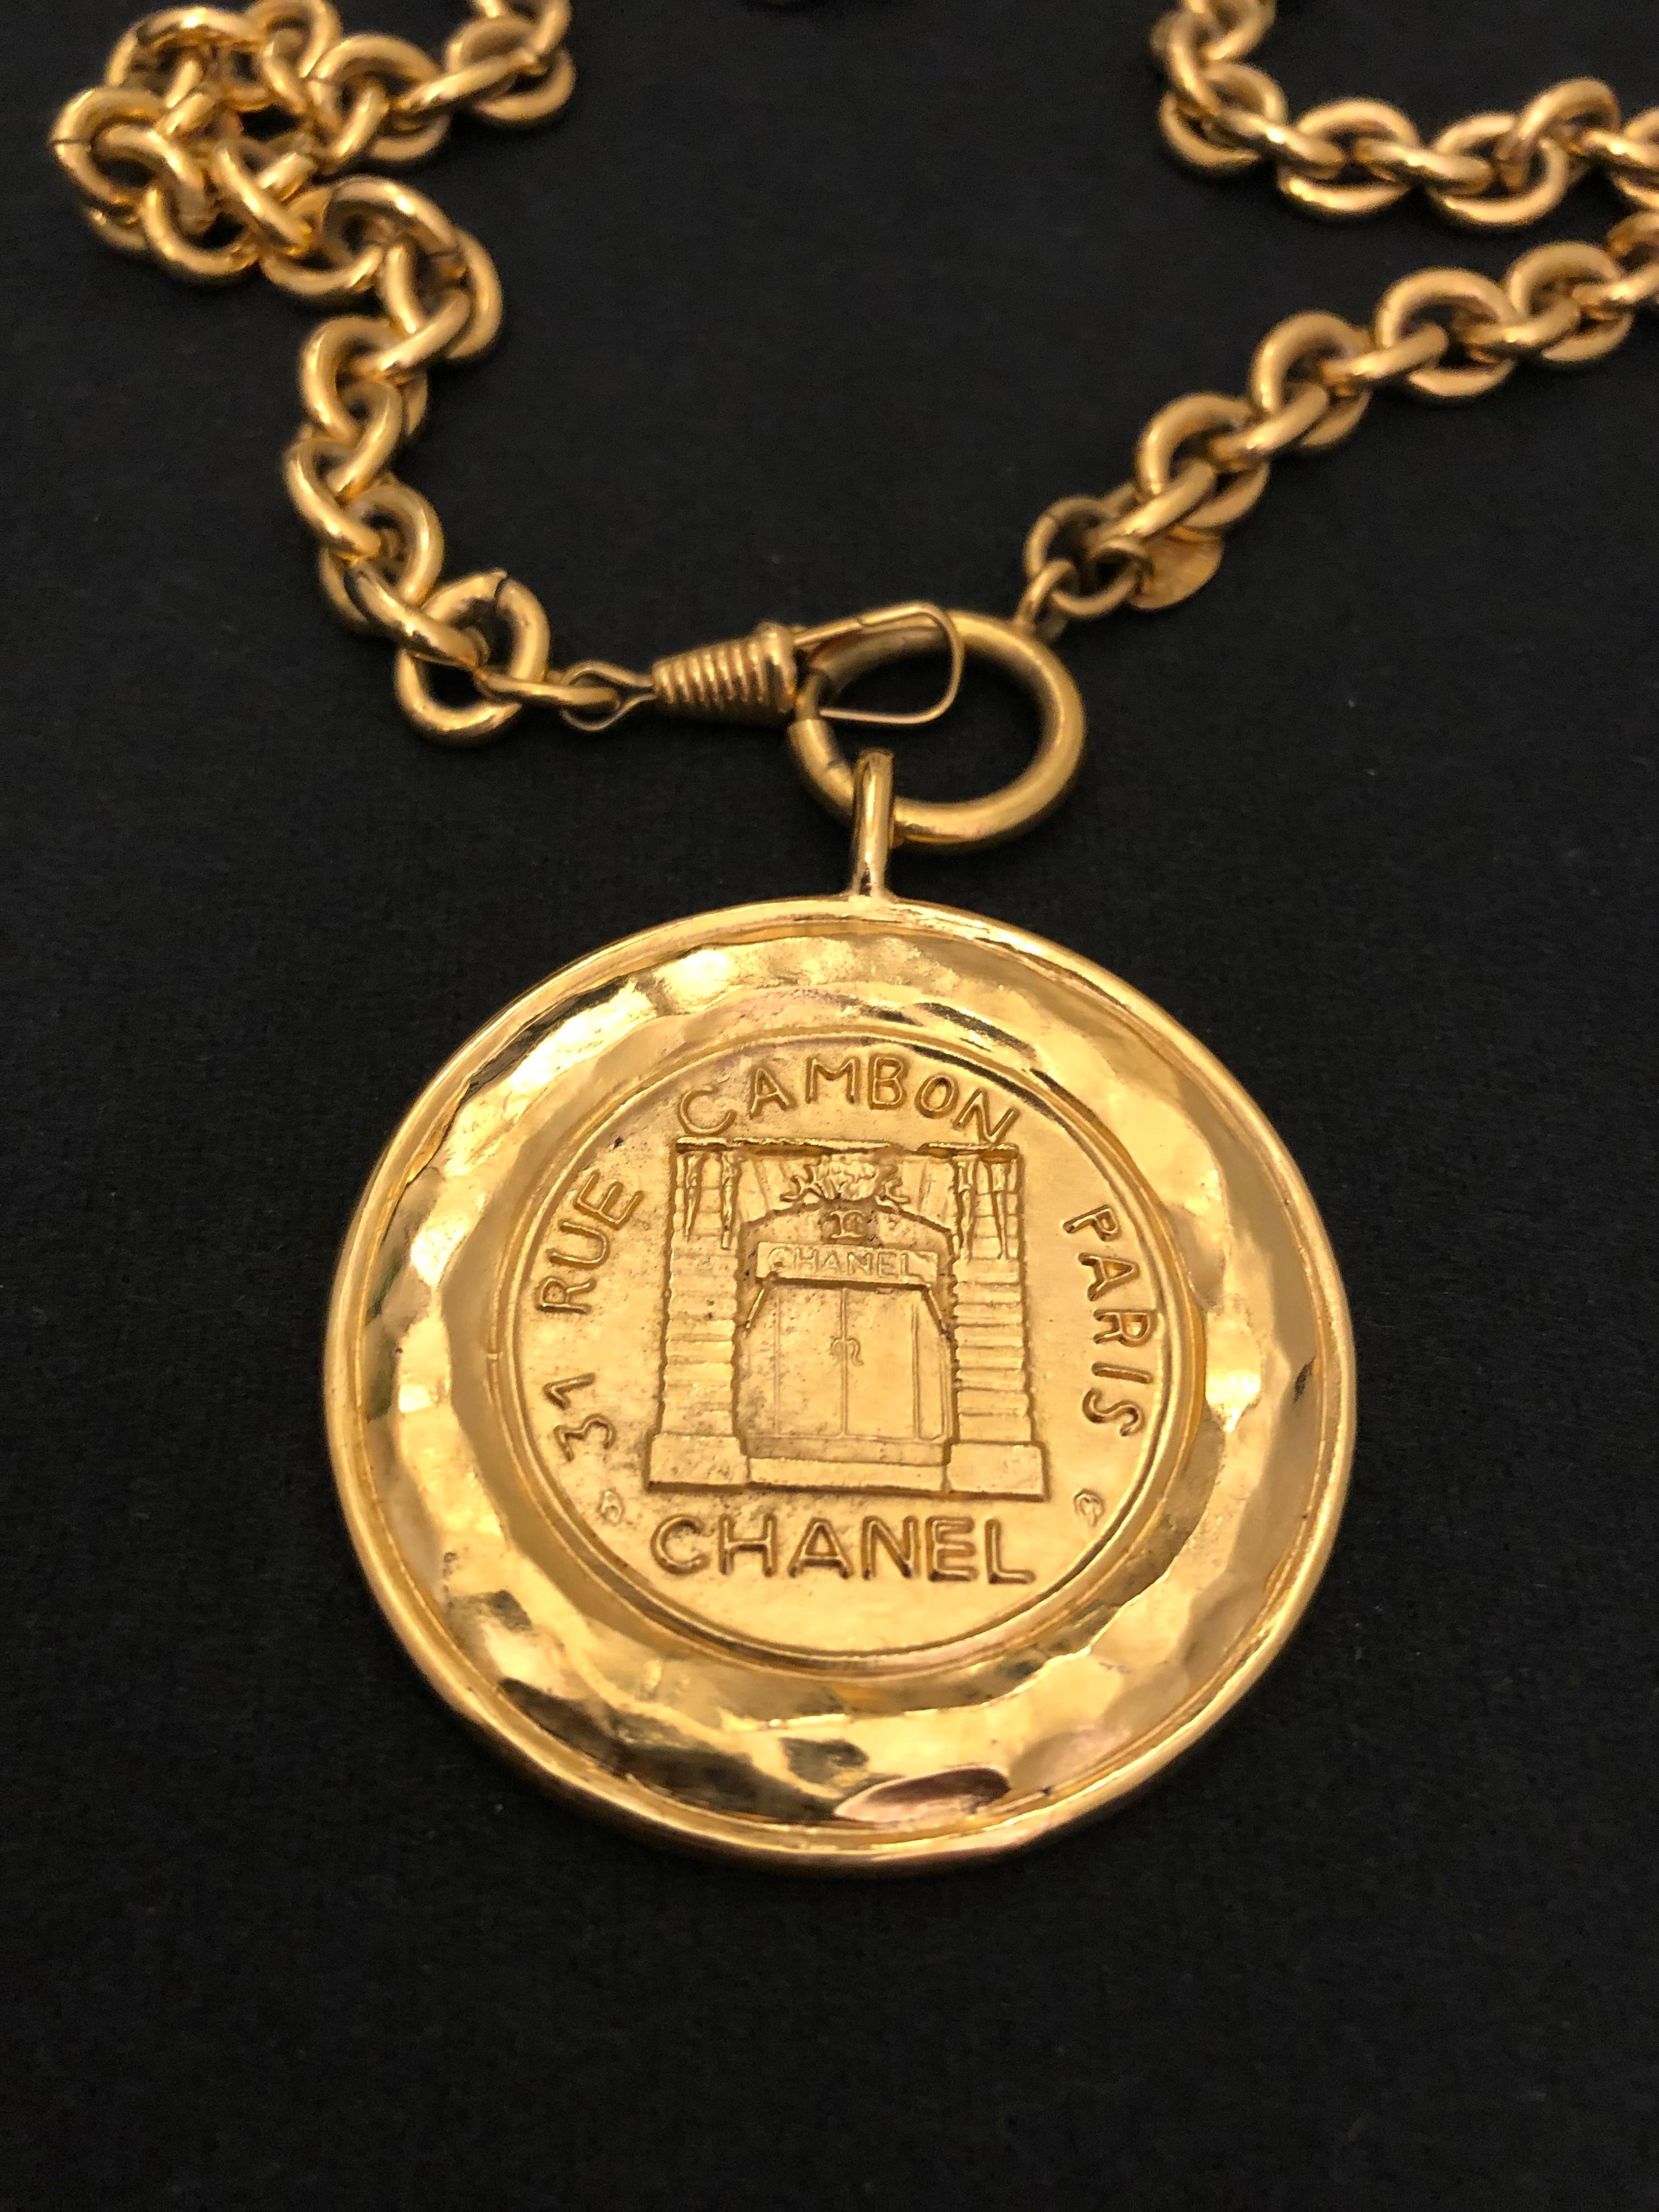 1980s Chanel gold toned chain necklace featuring a sturdy gold toned chain and a 31 Rue Cambon store front medallion charm. Stamped CHANEL made in France. Spring ring closure. Measures 74.5 cm Charm 5.1 cm. Comes with box.

Condition - Minor signs